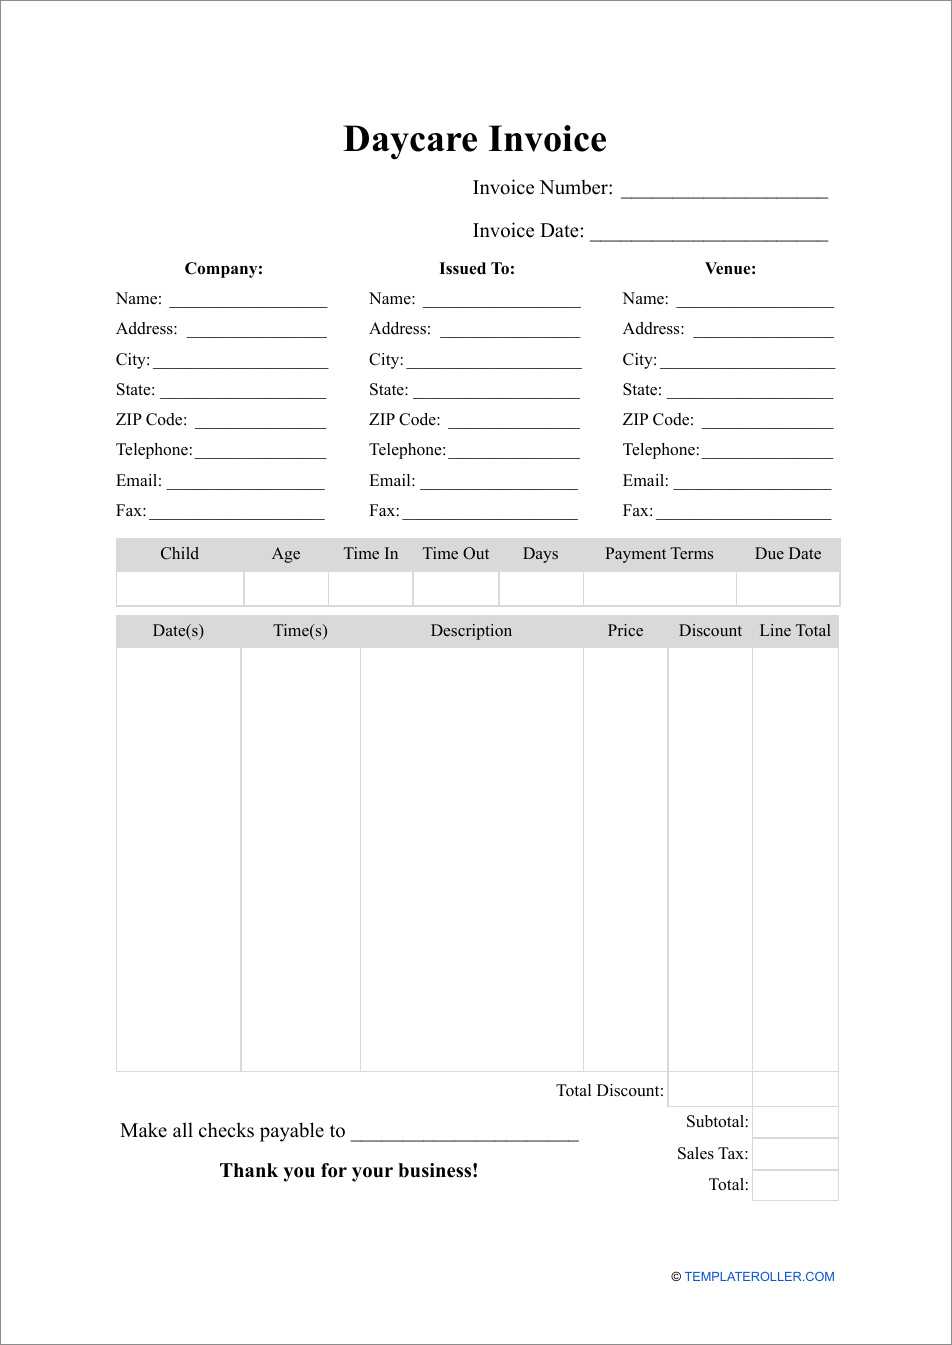 example of daycare invoice template